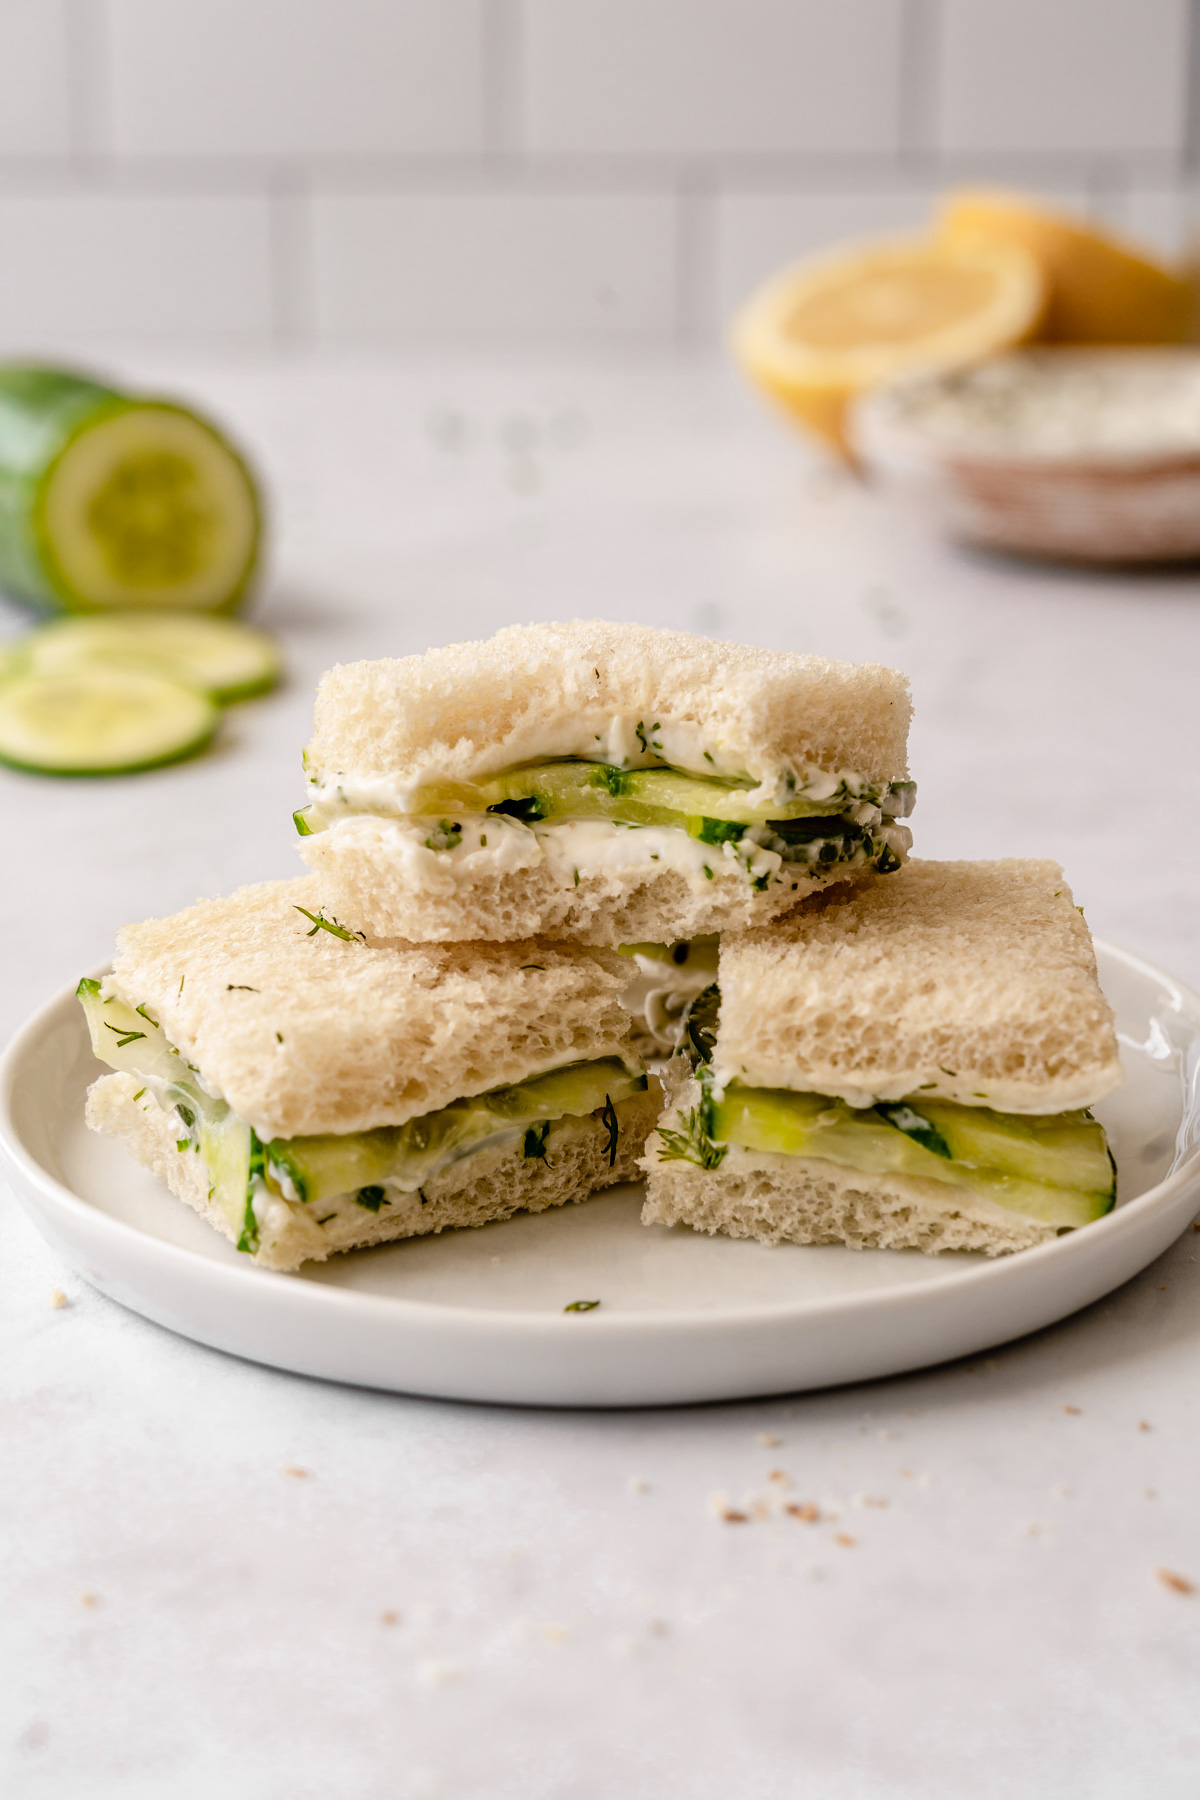 Three cucumber sandwiches stacked on a plate with the top one with a bite.